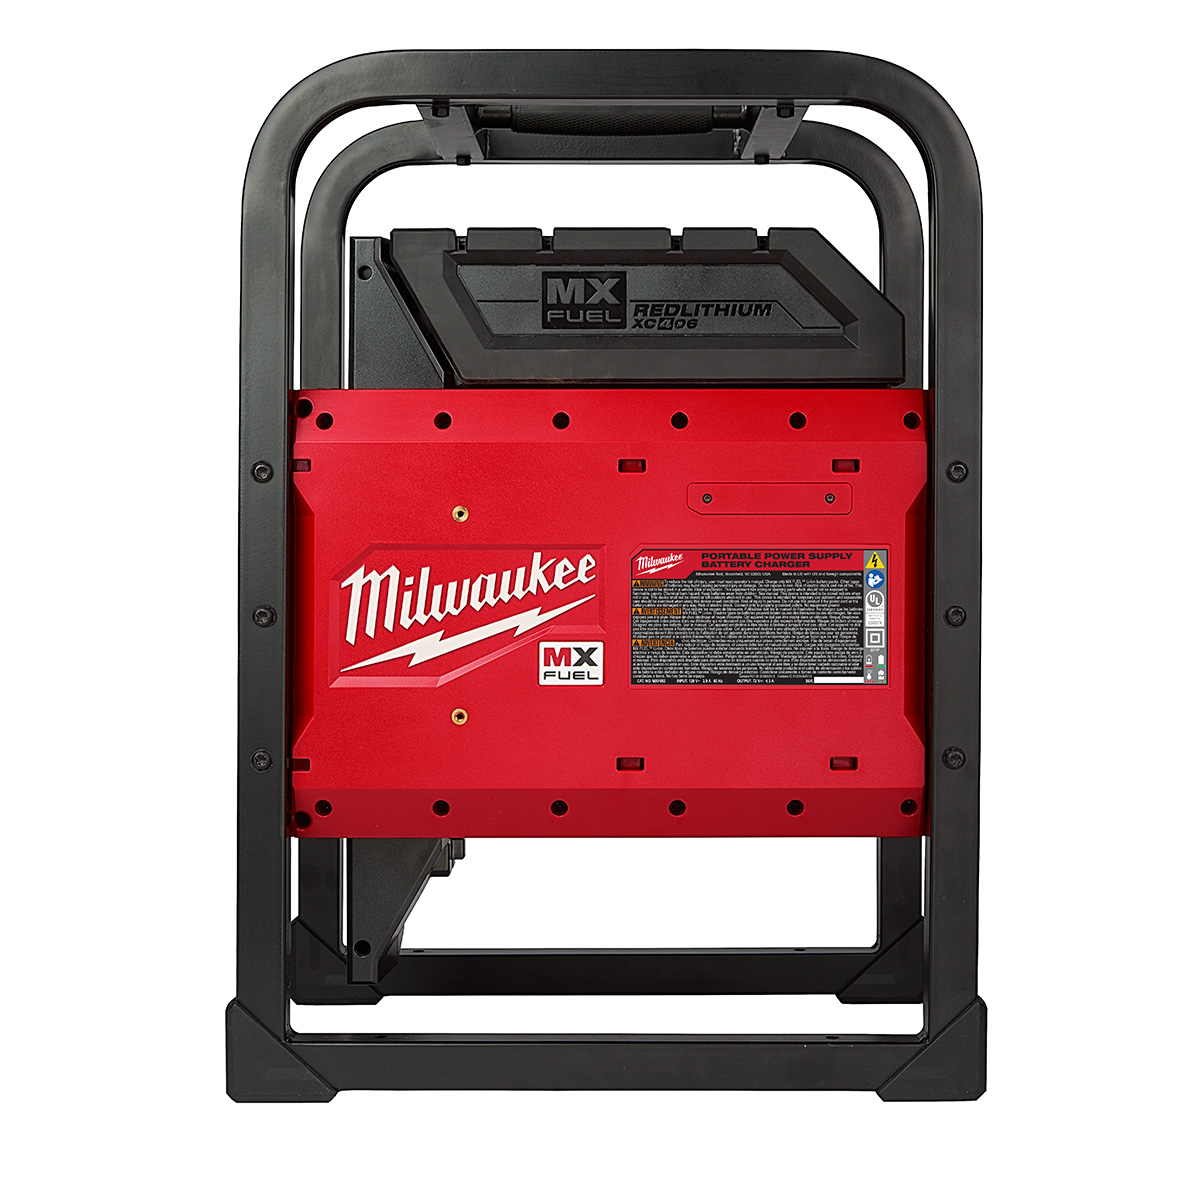 Milwaukee MX FUEL Carry-On 3600W/1800W Power Supply Generator from Columbia Safety